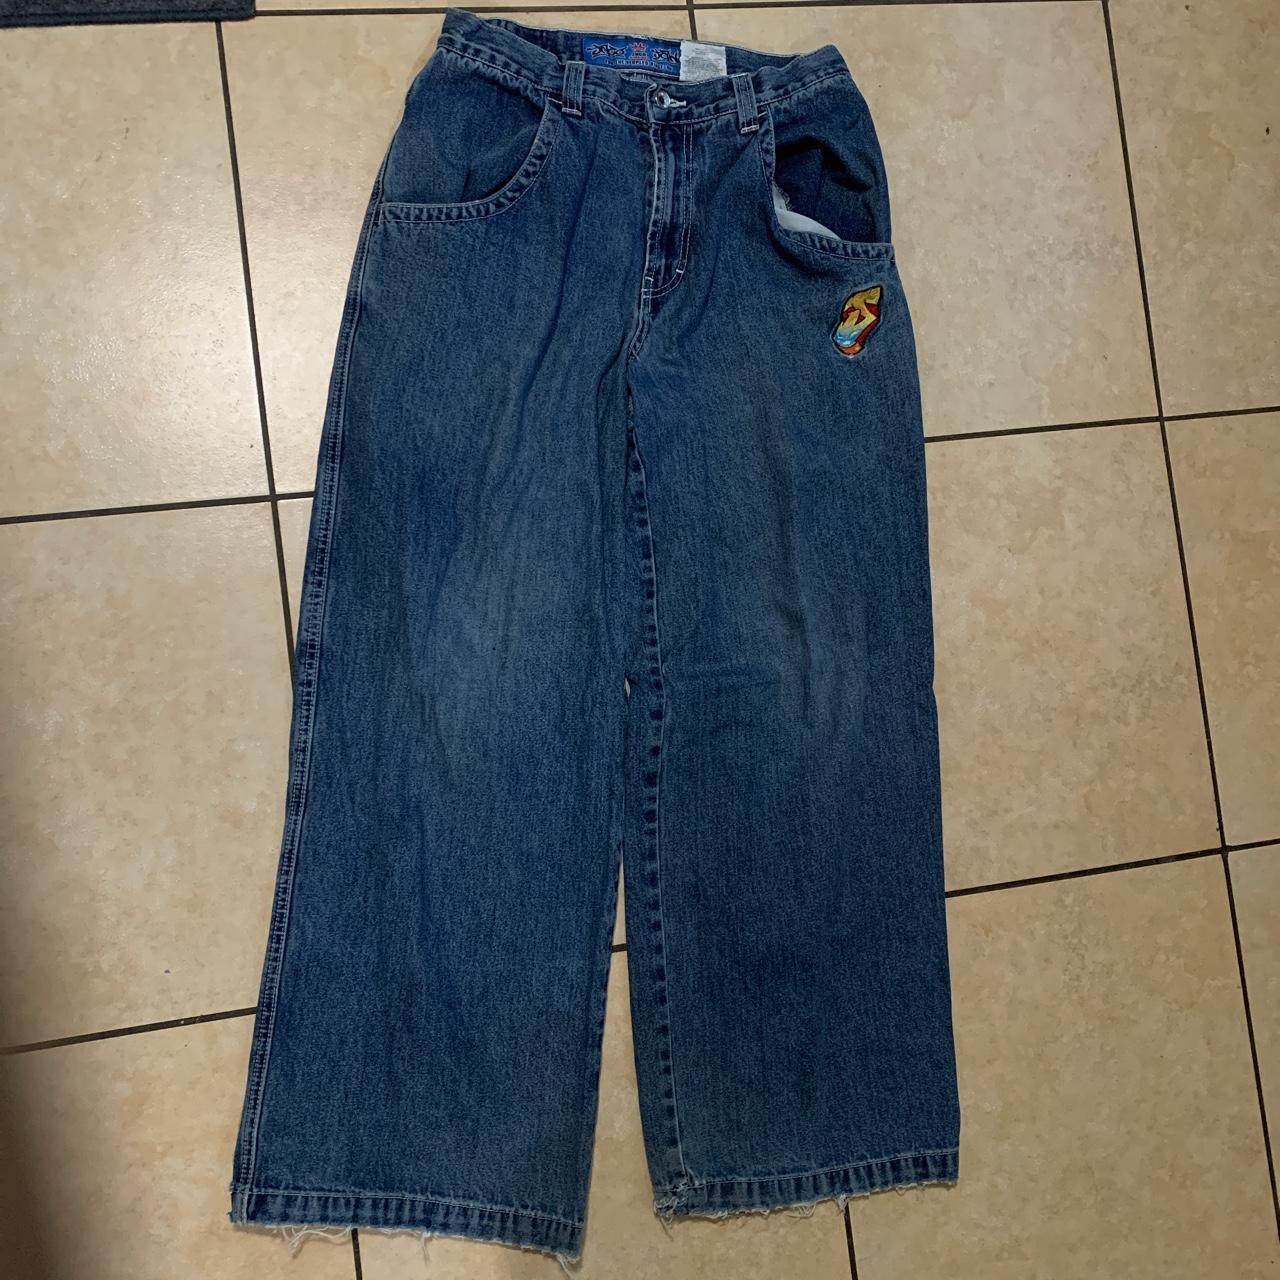 Rare graffiti jnco jeans that are used and has... - Depop